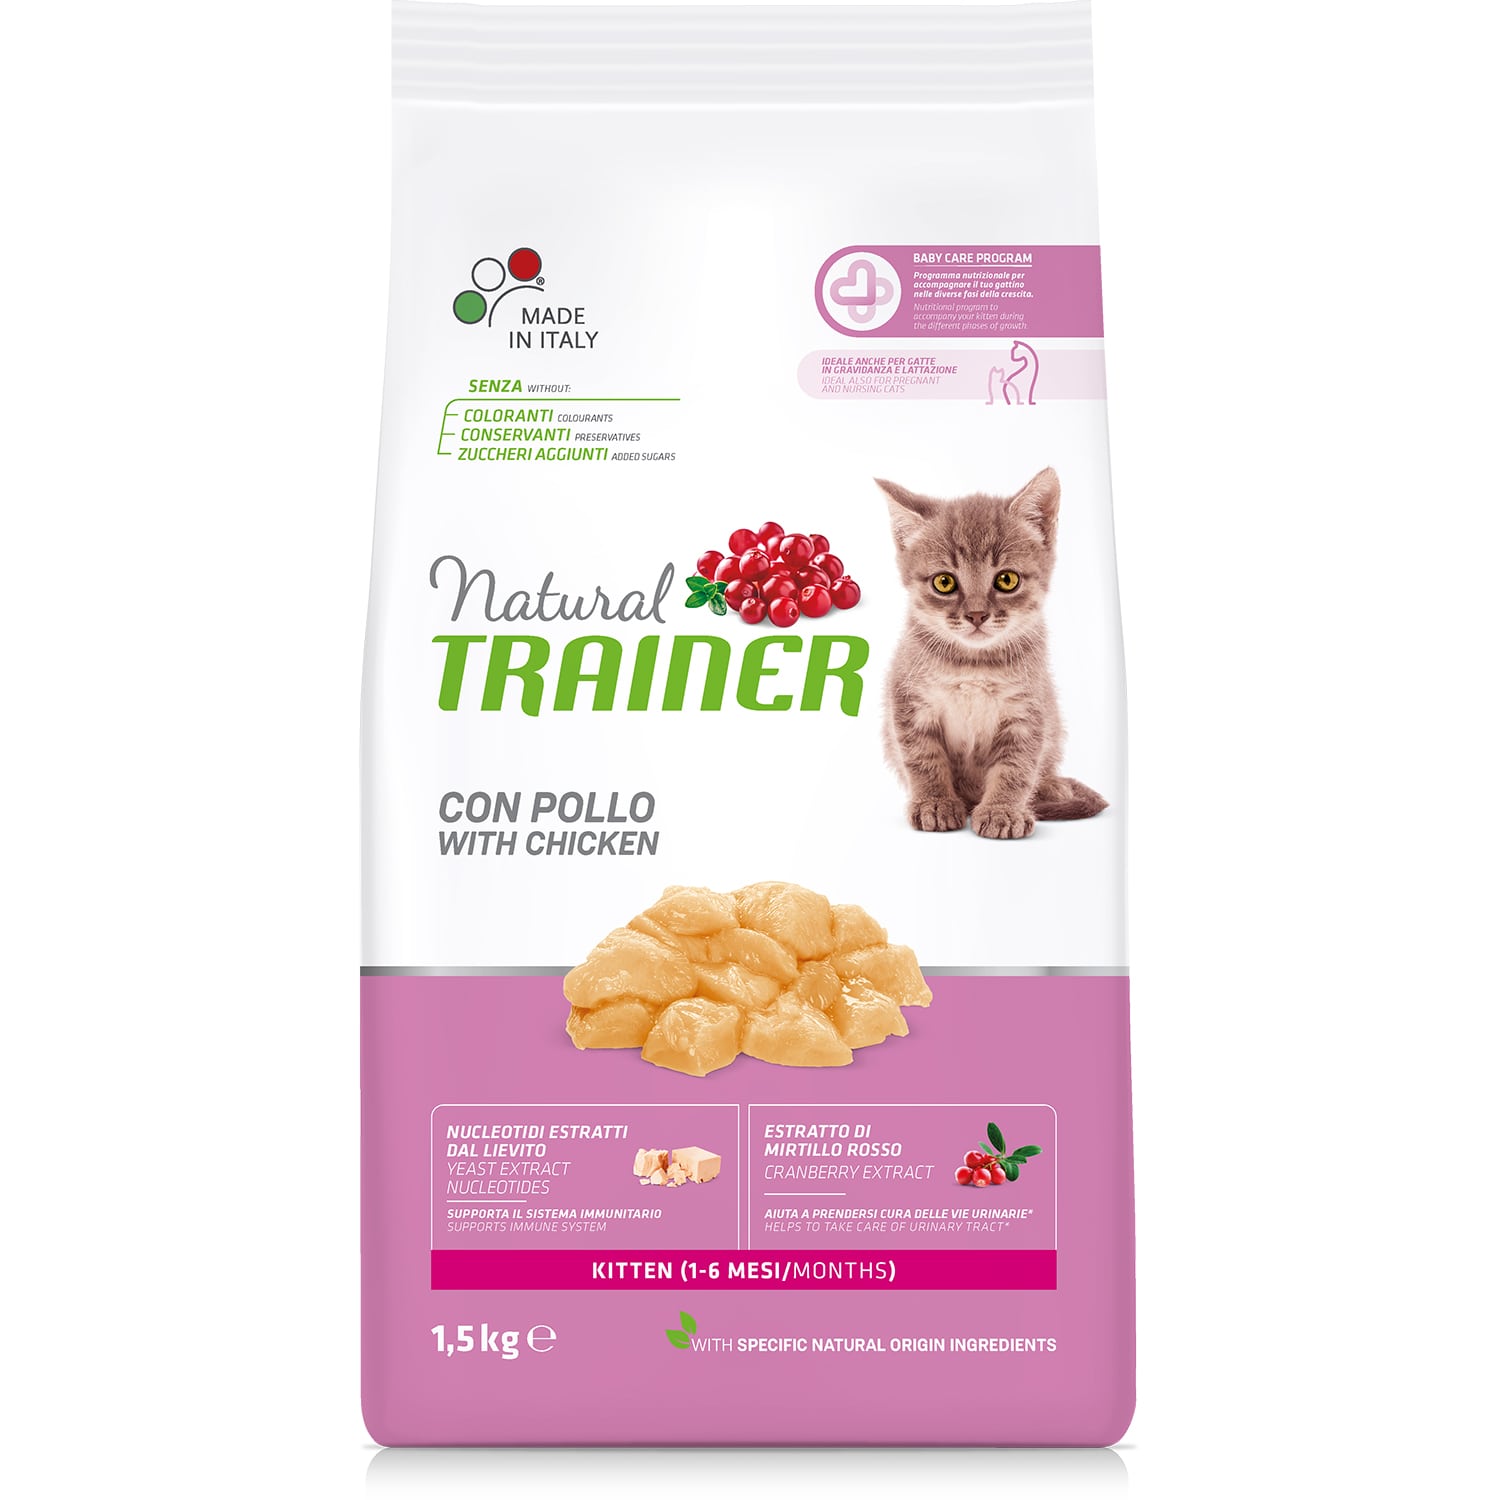 Trainer Natural Fitness Kitten Курица (от 1 до 6 мес) для котят 1